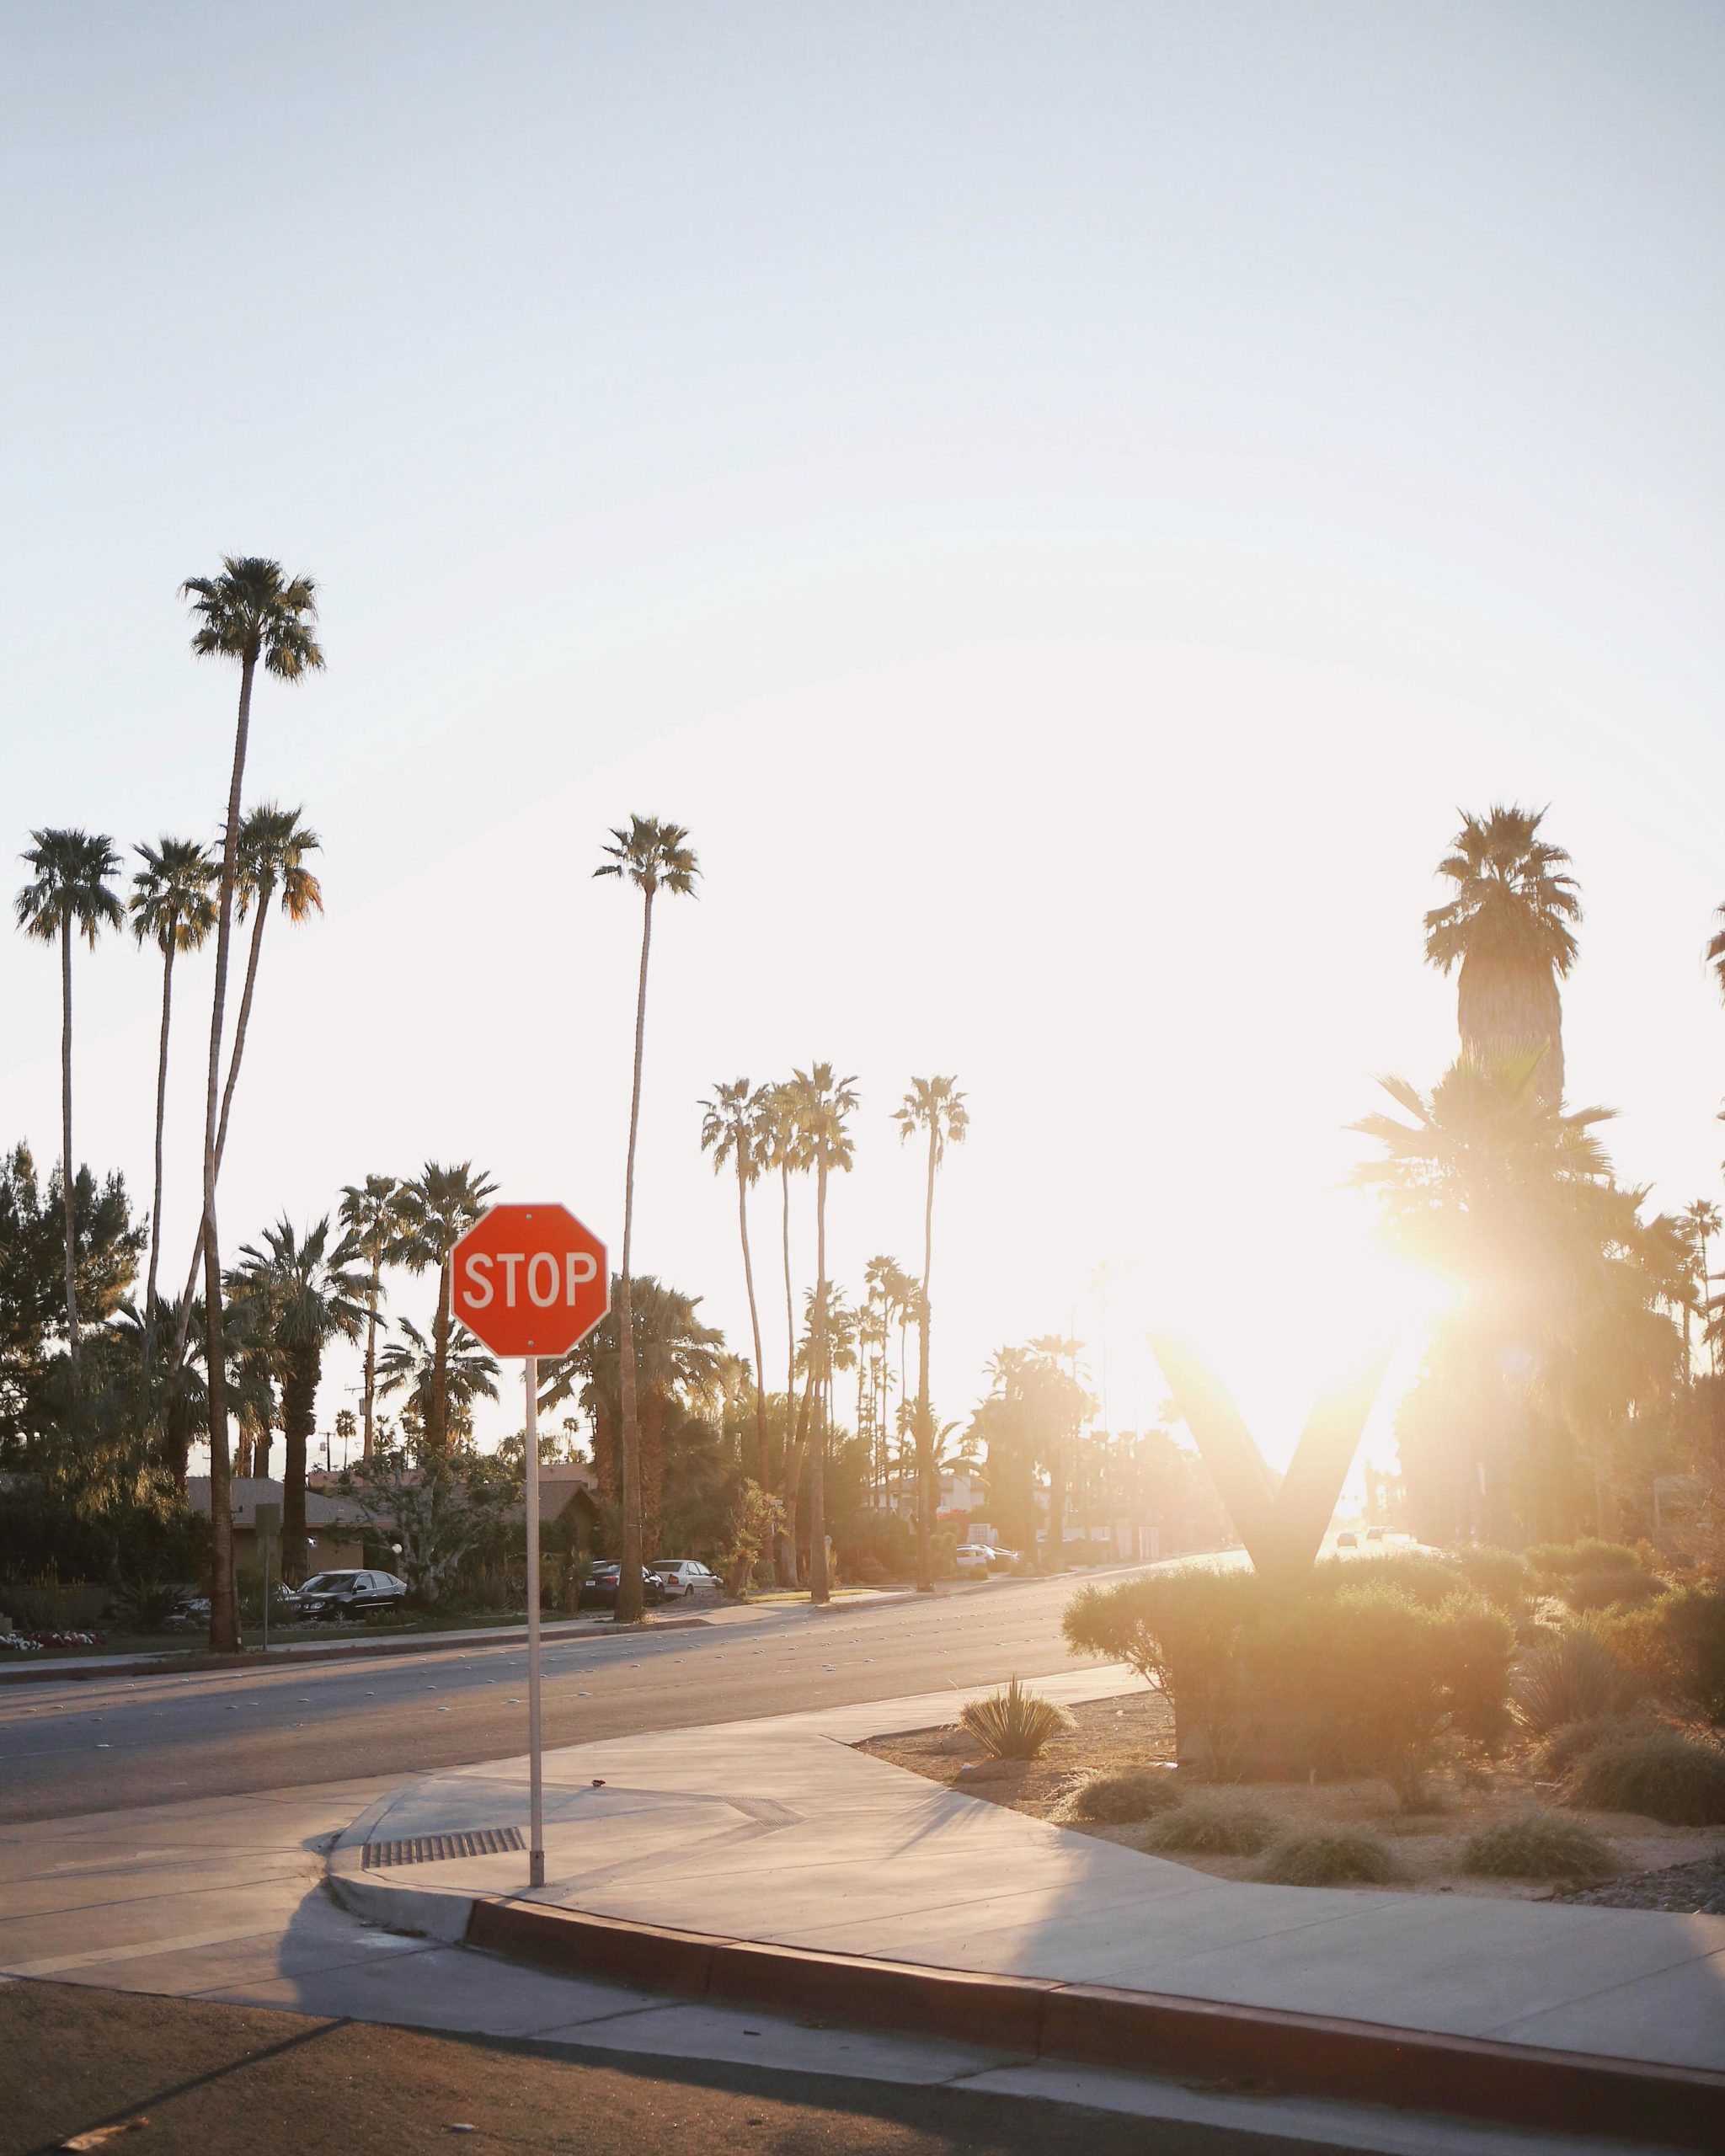 California Dreaming +california + road trip + los angeles + julia comil + modersvp + fashion + editorial + influencer + french + inspiration + palm springs